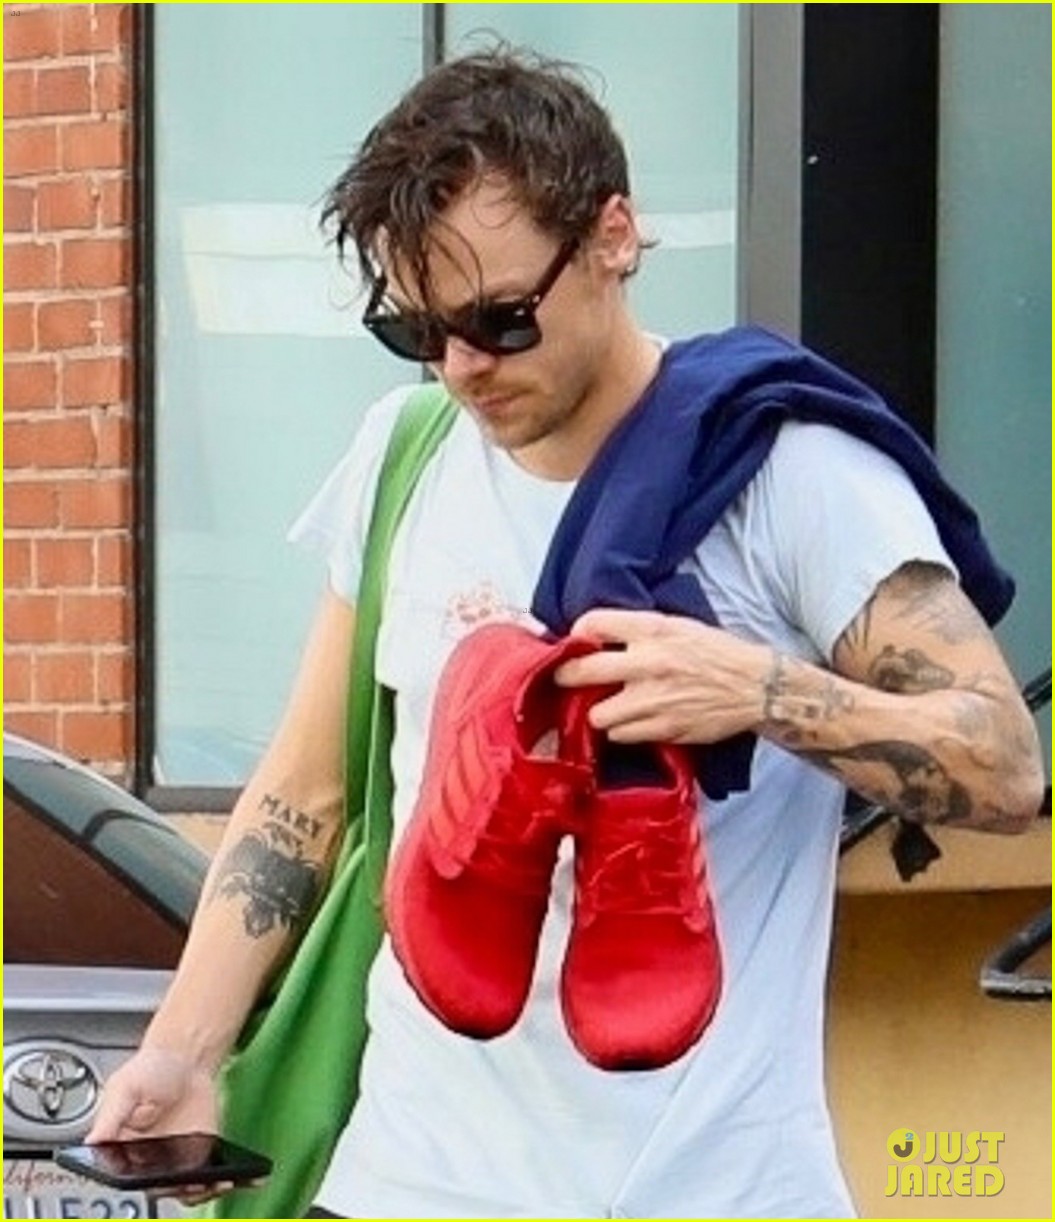 harry styles olivia wilde at gym 04